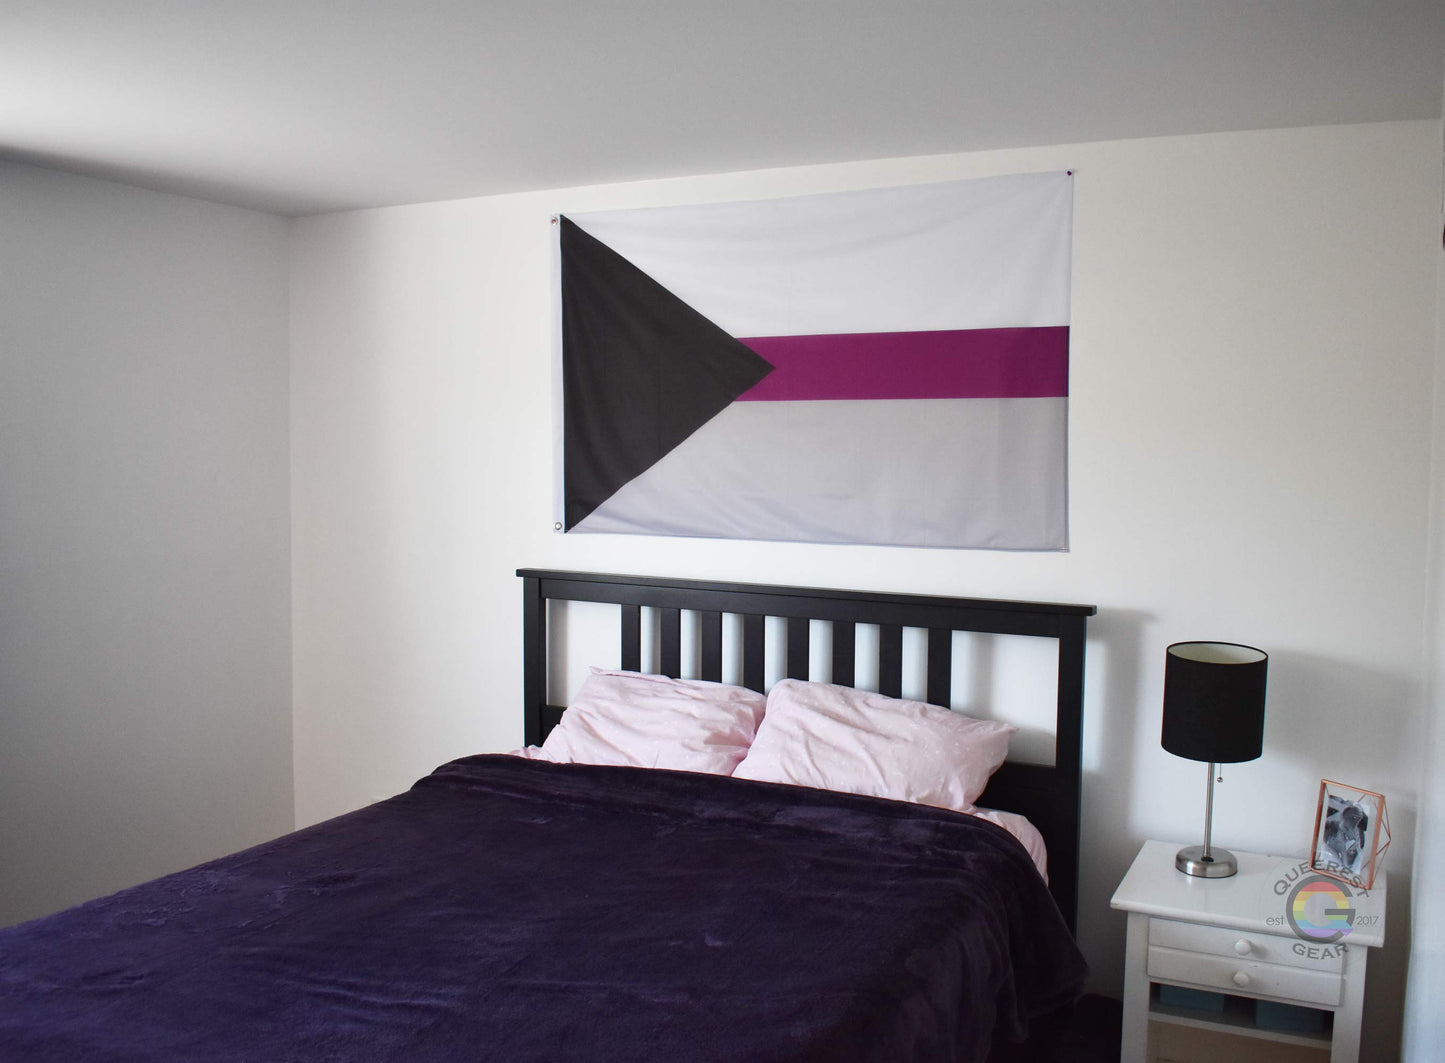 3’x5’ demisexual pride flag hanging horizontally on the wall of a bedroom centered above a bed with a purple blanket